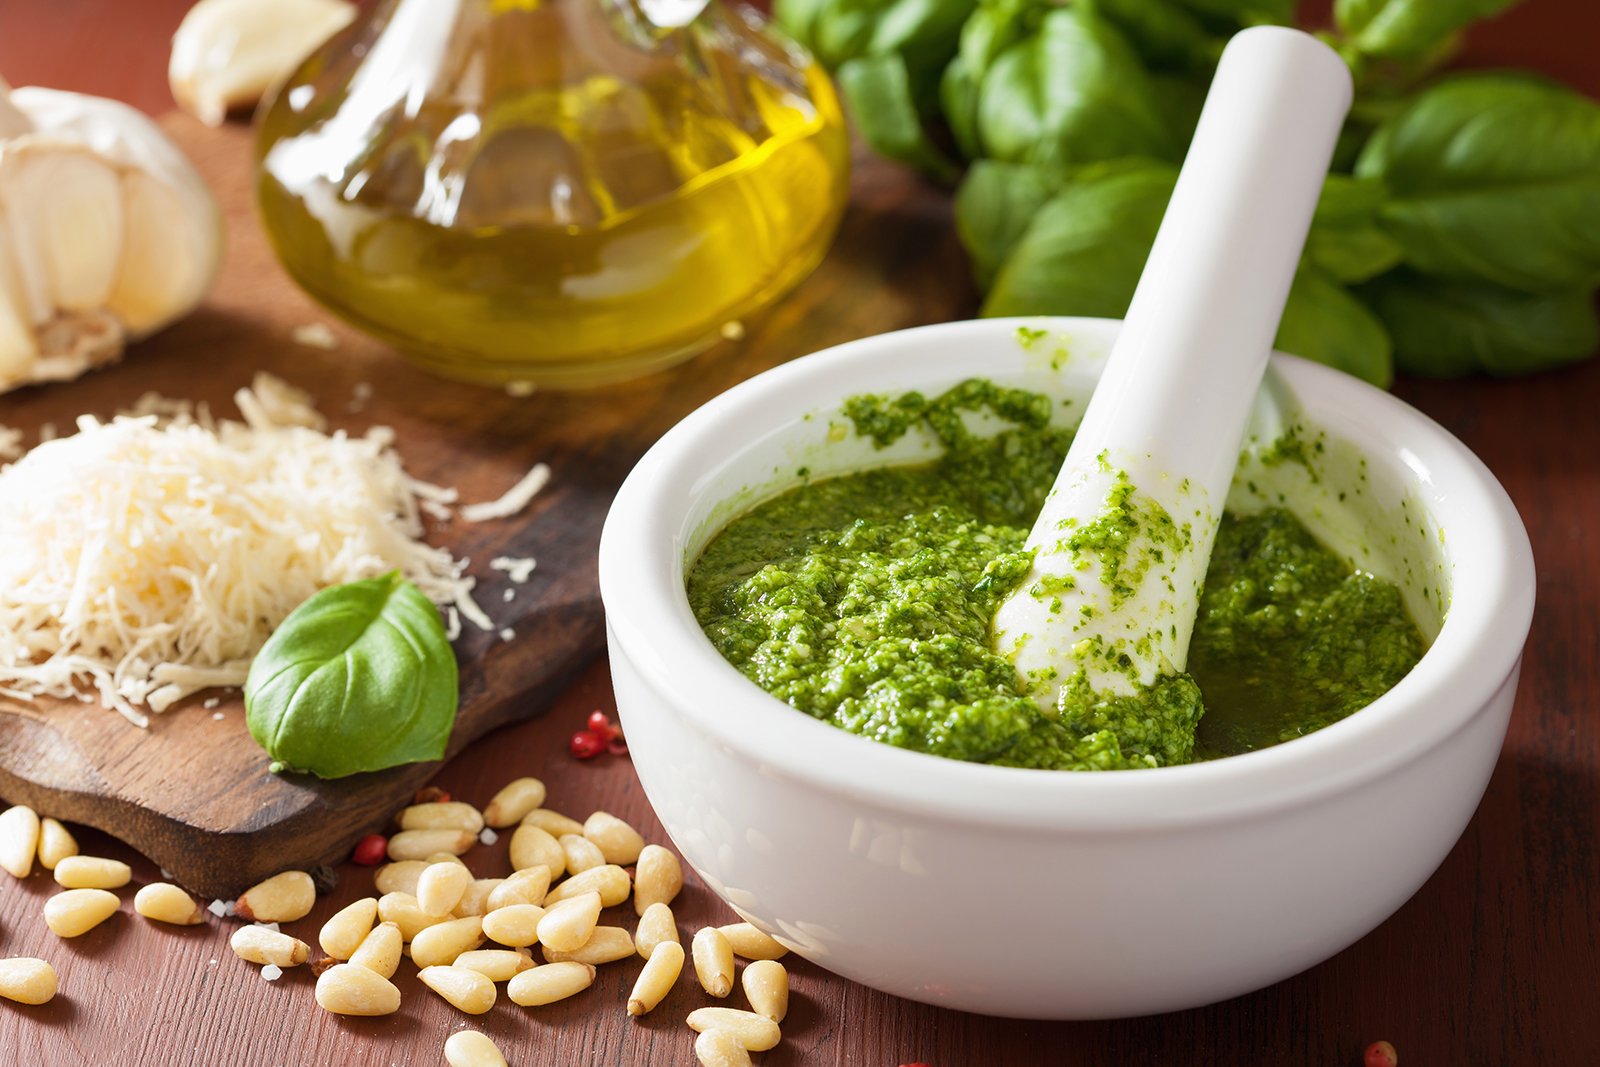 Cooking table with olive oil, cheese and a fresh bowl of pesto sauce